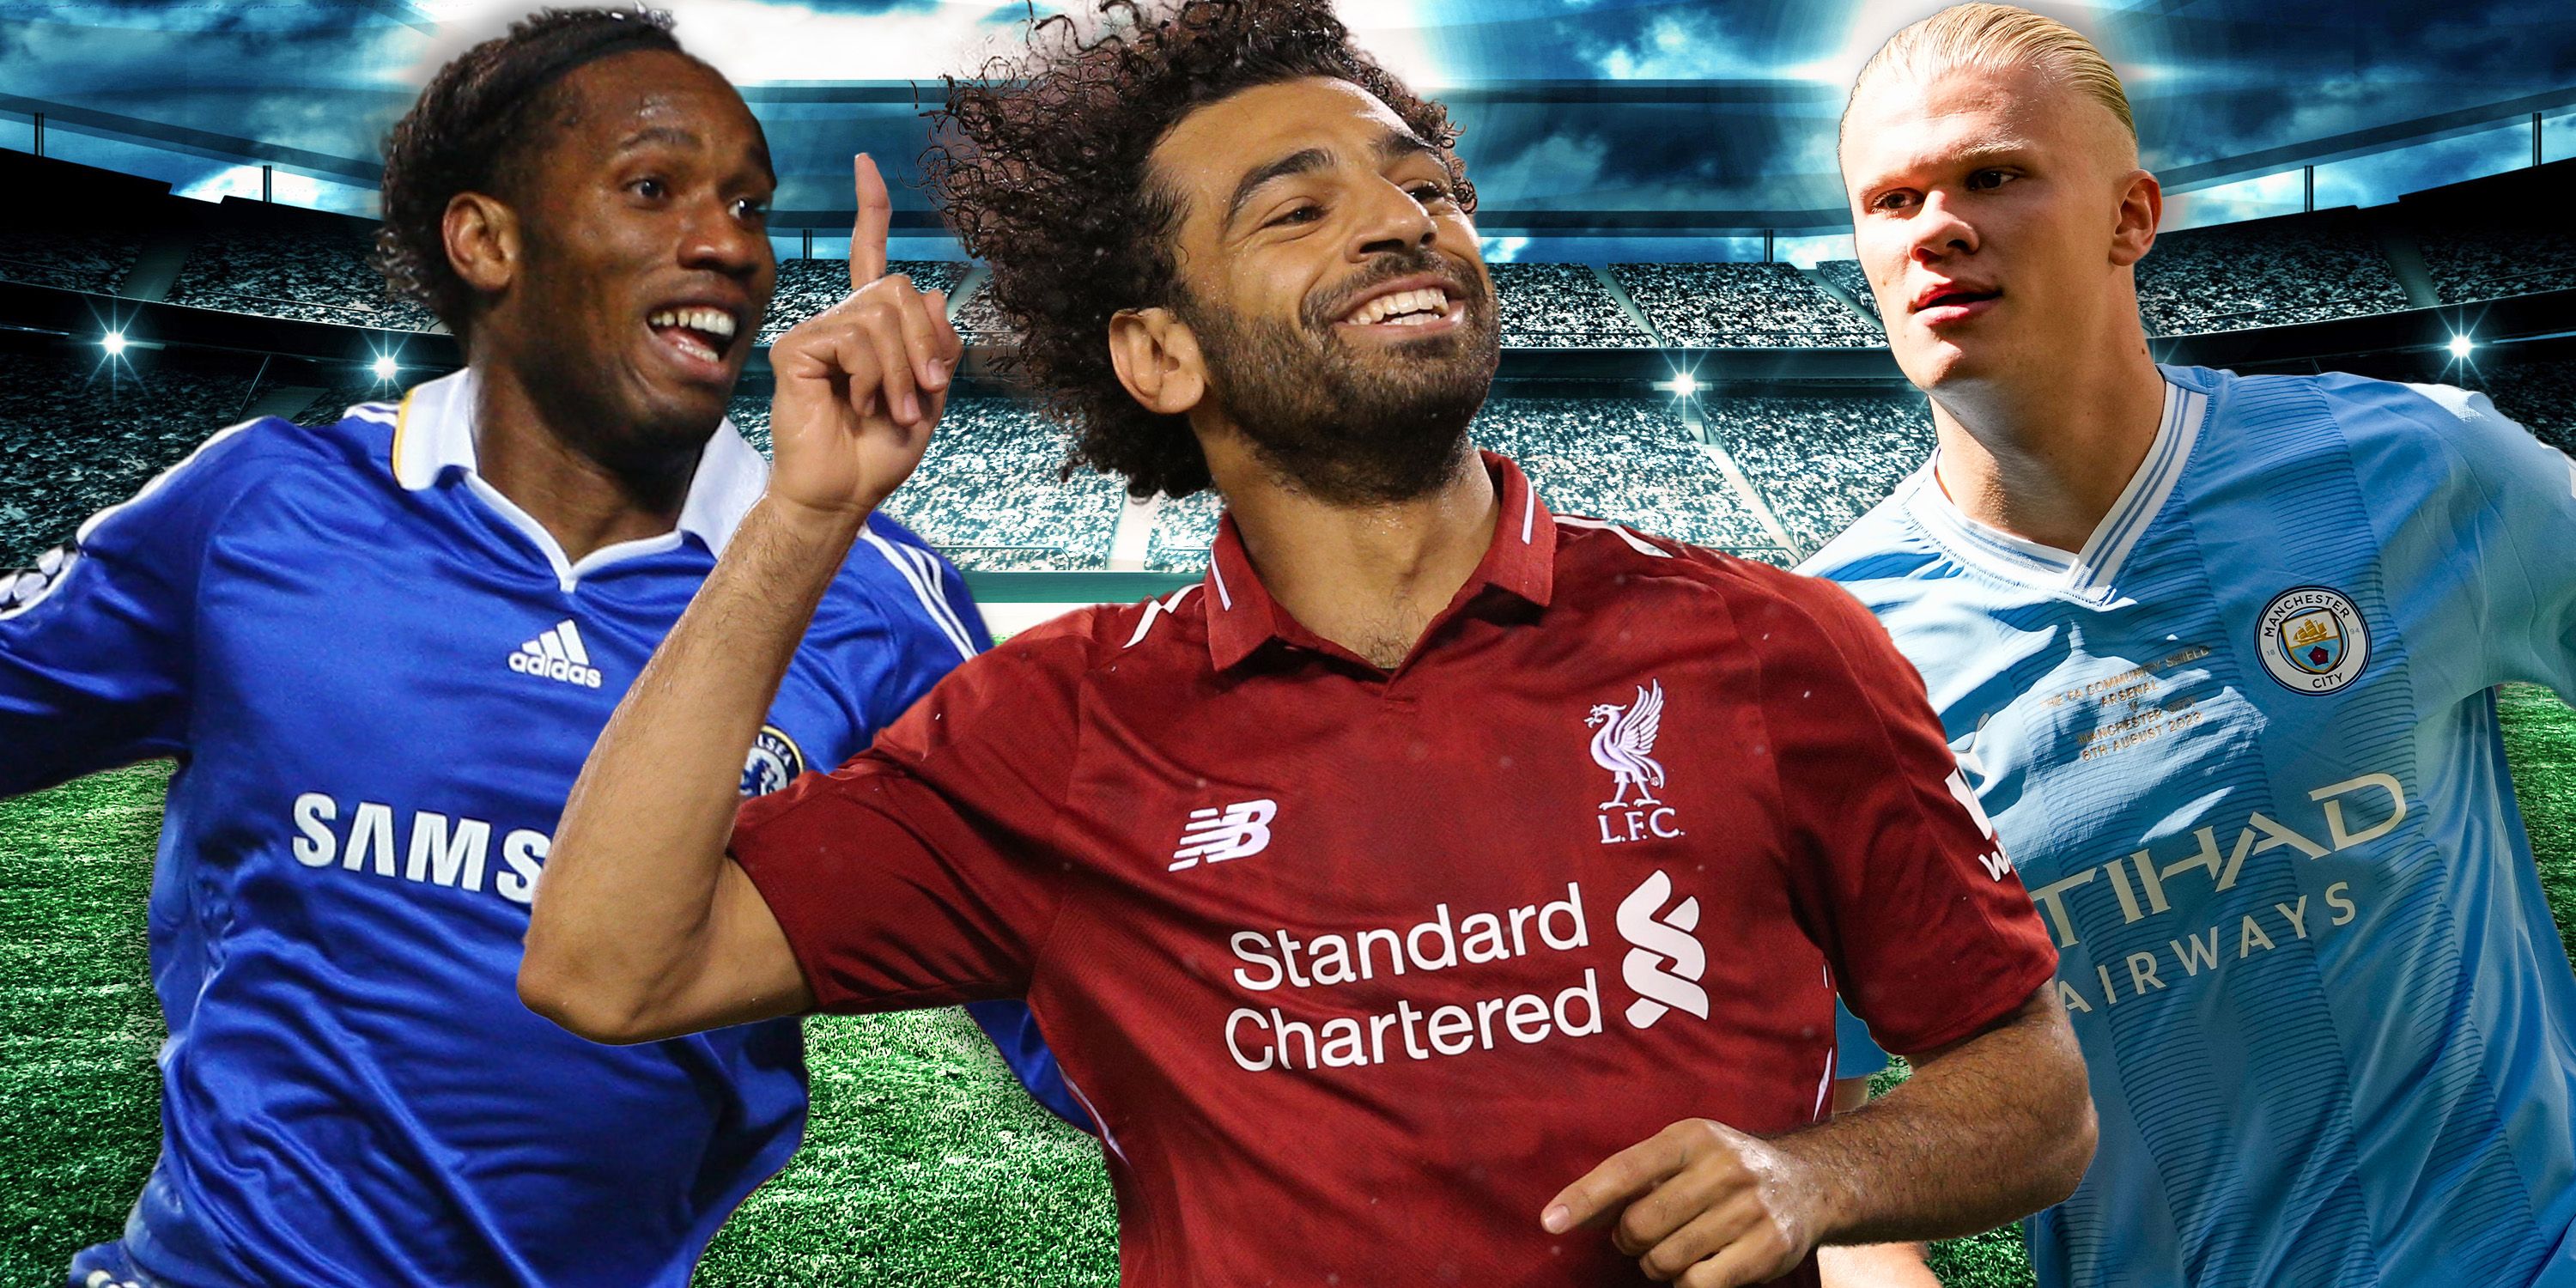 Collage featuring Chelsea's Didier Drogba, Liverpool's Mohamed Salah & Manchester City's Erling Haaland.